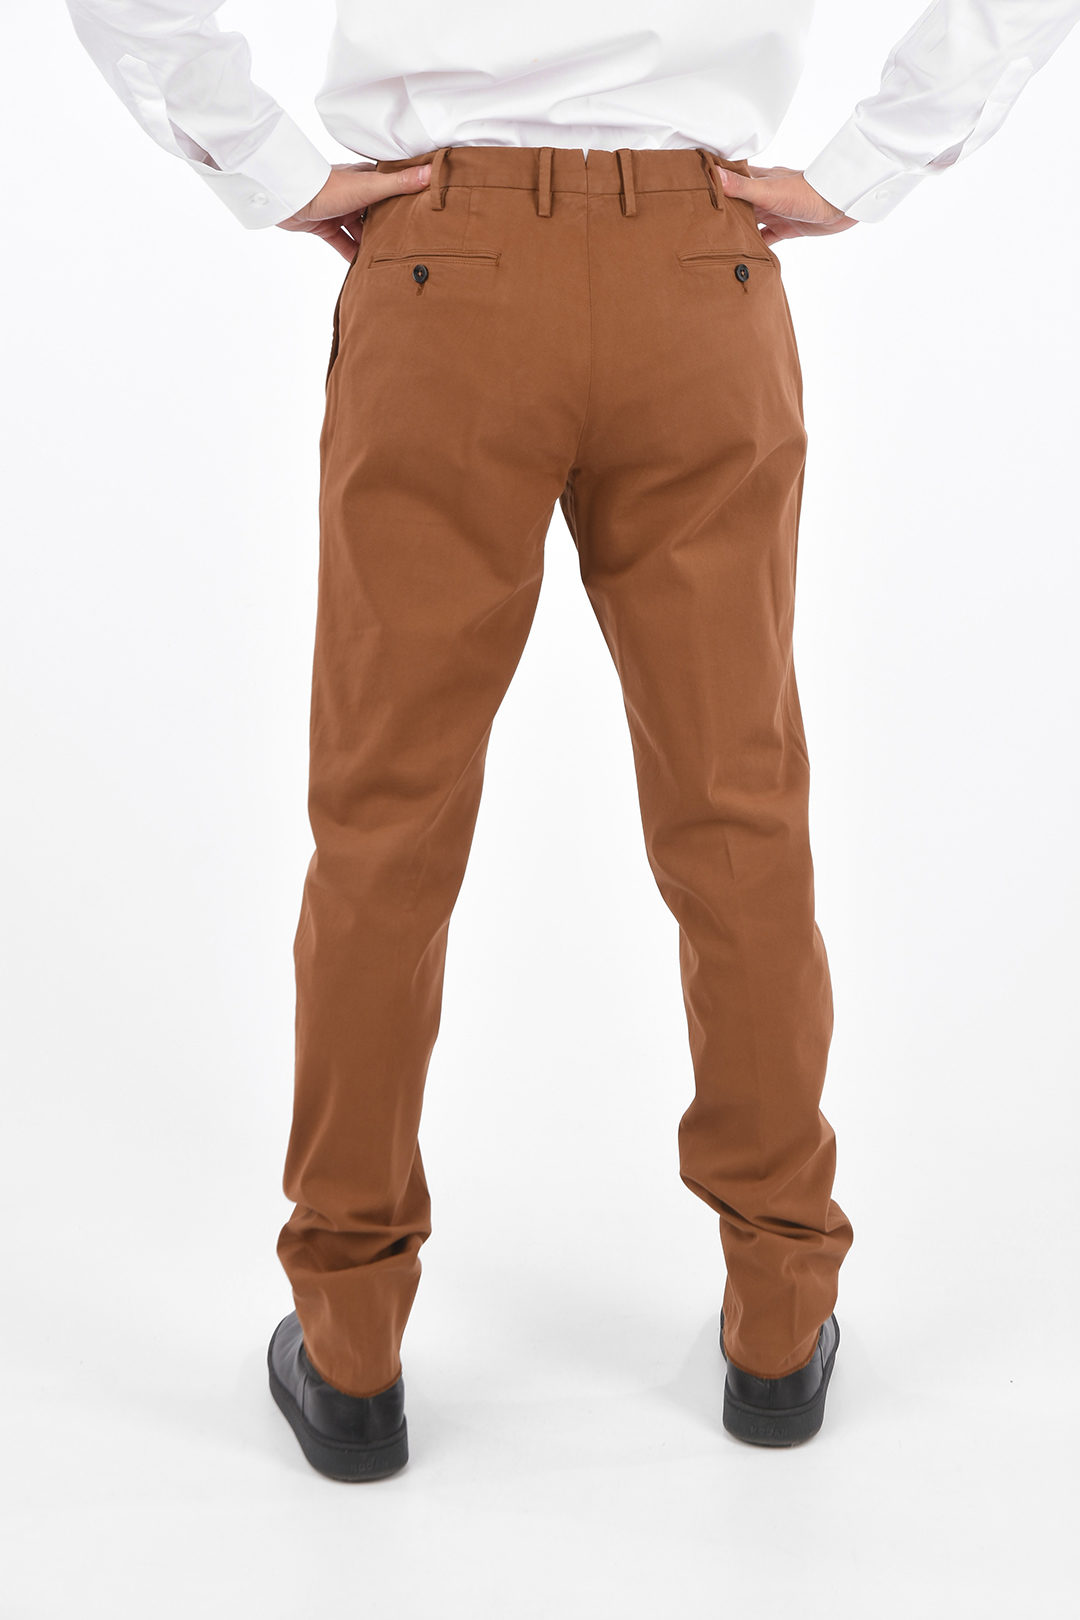 ACNE STUDIOS Flared stretch-cotton twill pants | NET-A-PORTER